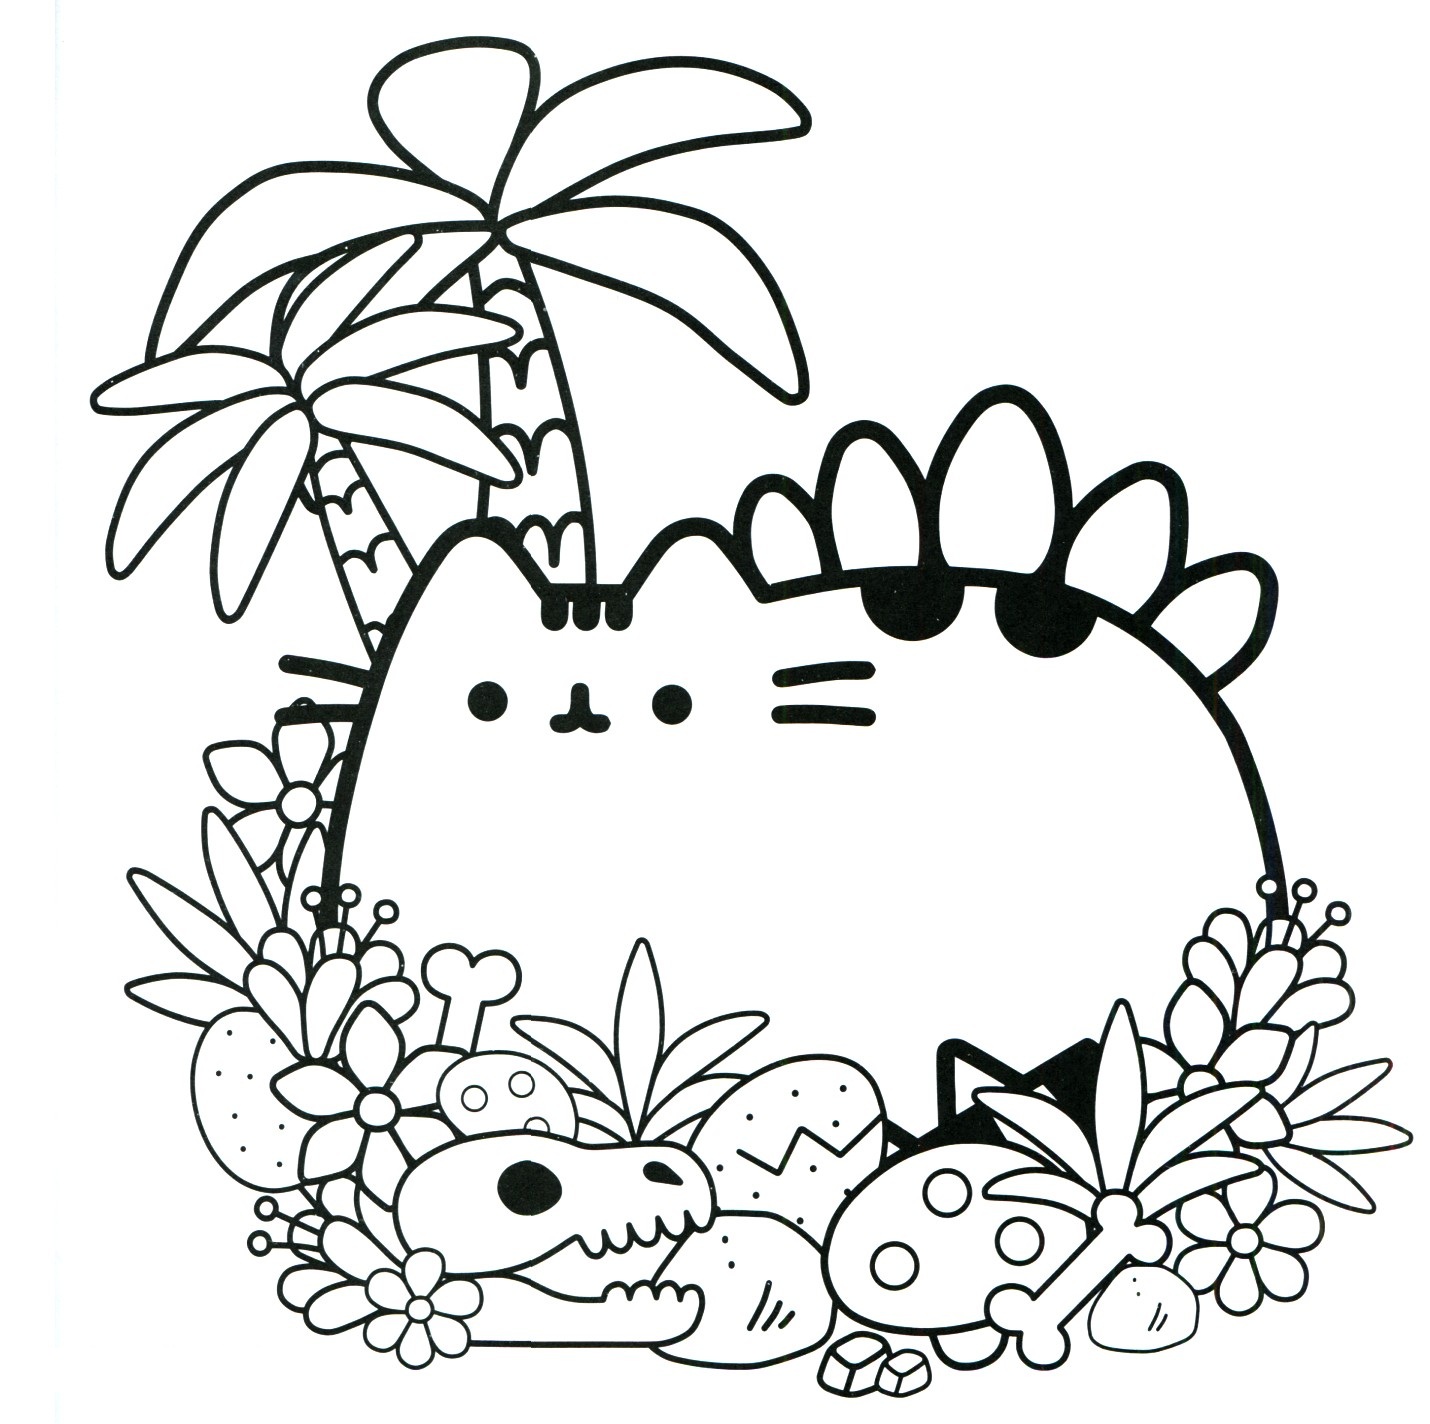 Cute Pusheen Coloring Page - Free Printable Coloring Pages for Kids